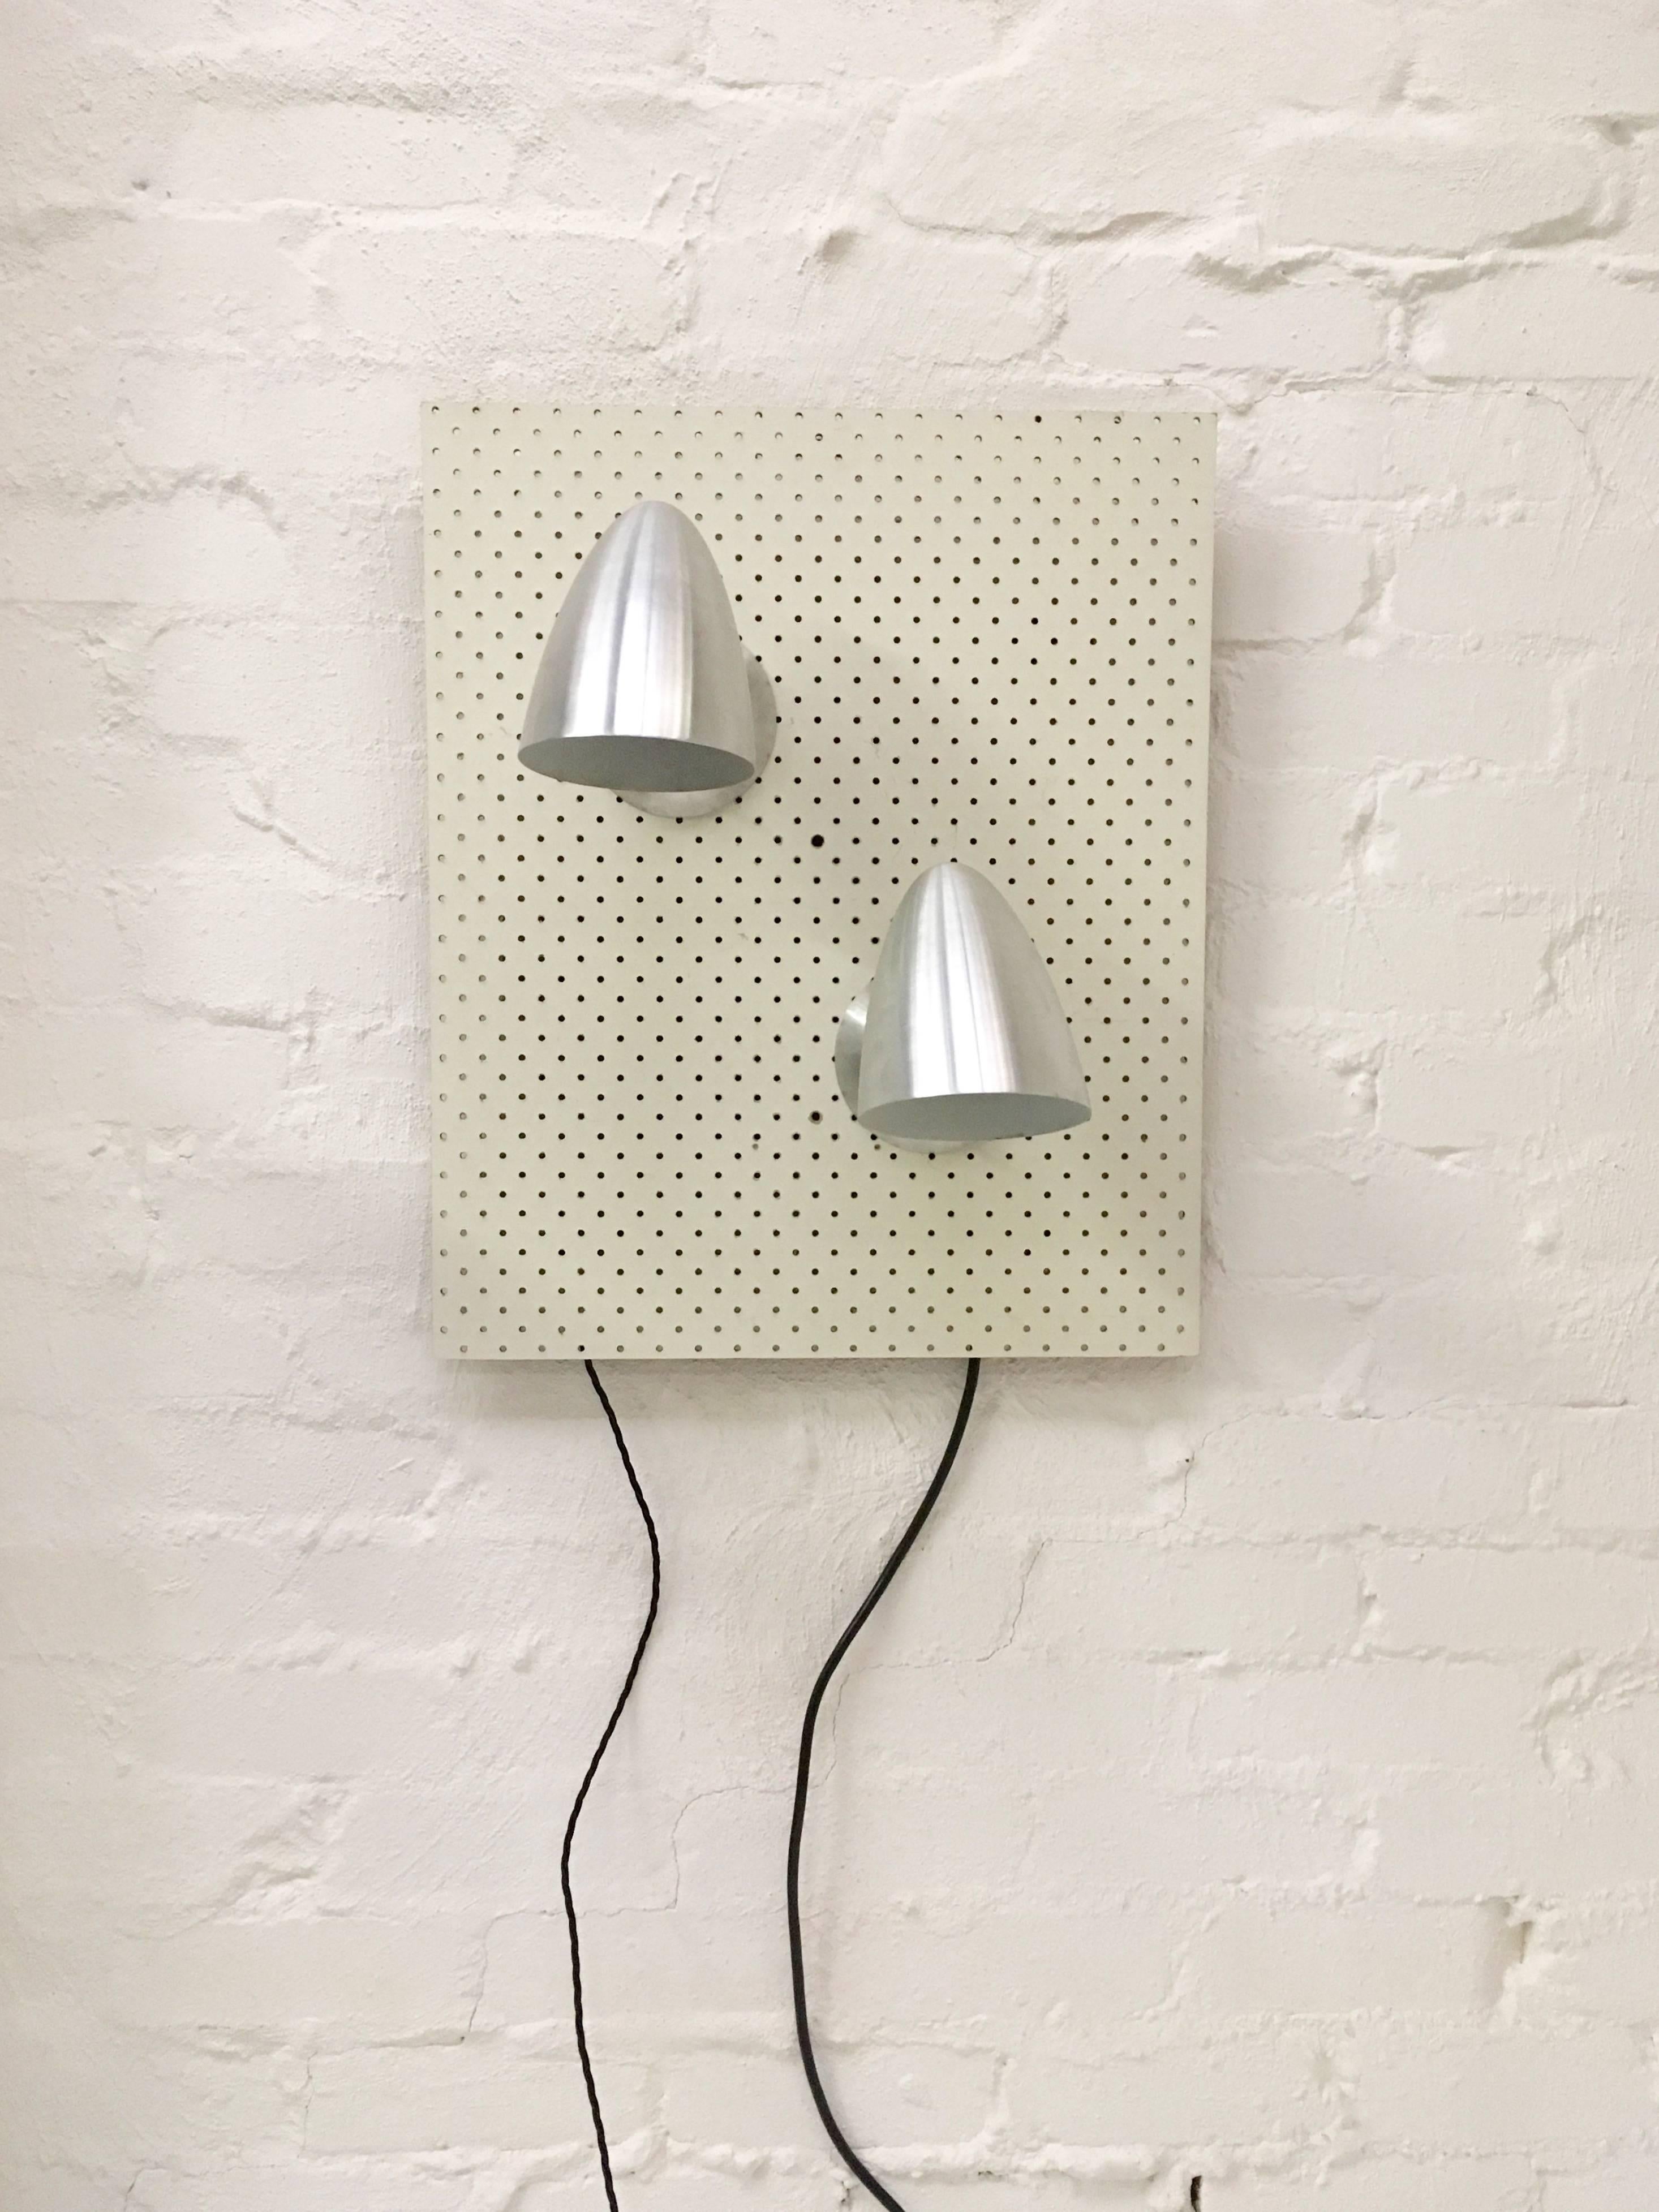 Spun Brown Evans and Co 'BECO' Wall Sconce Melbourne, 1950s